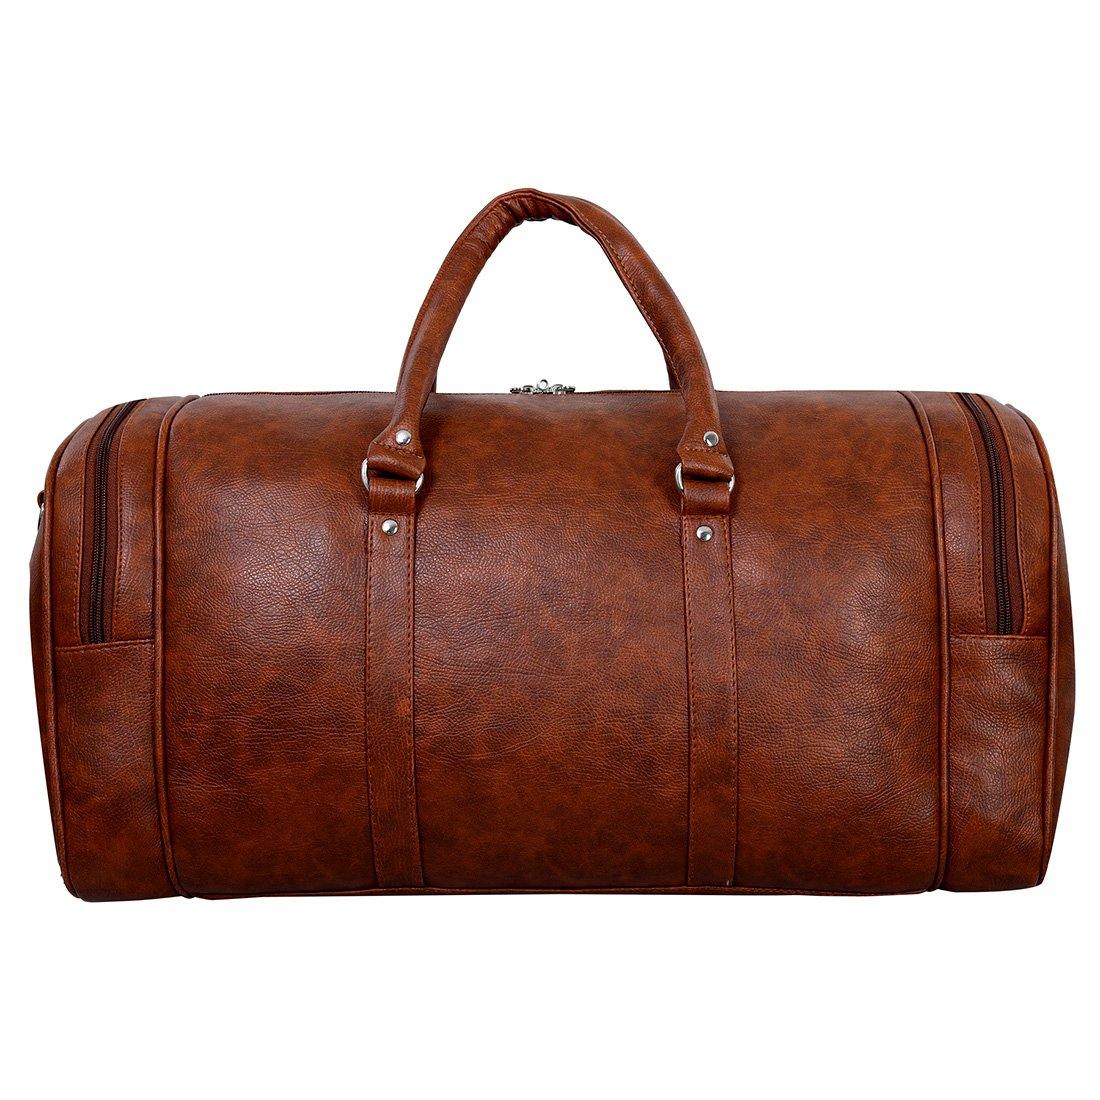 Buy Luxury Leather Laptop Bags and Backpacks Online